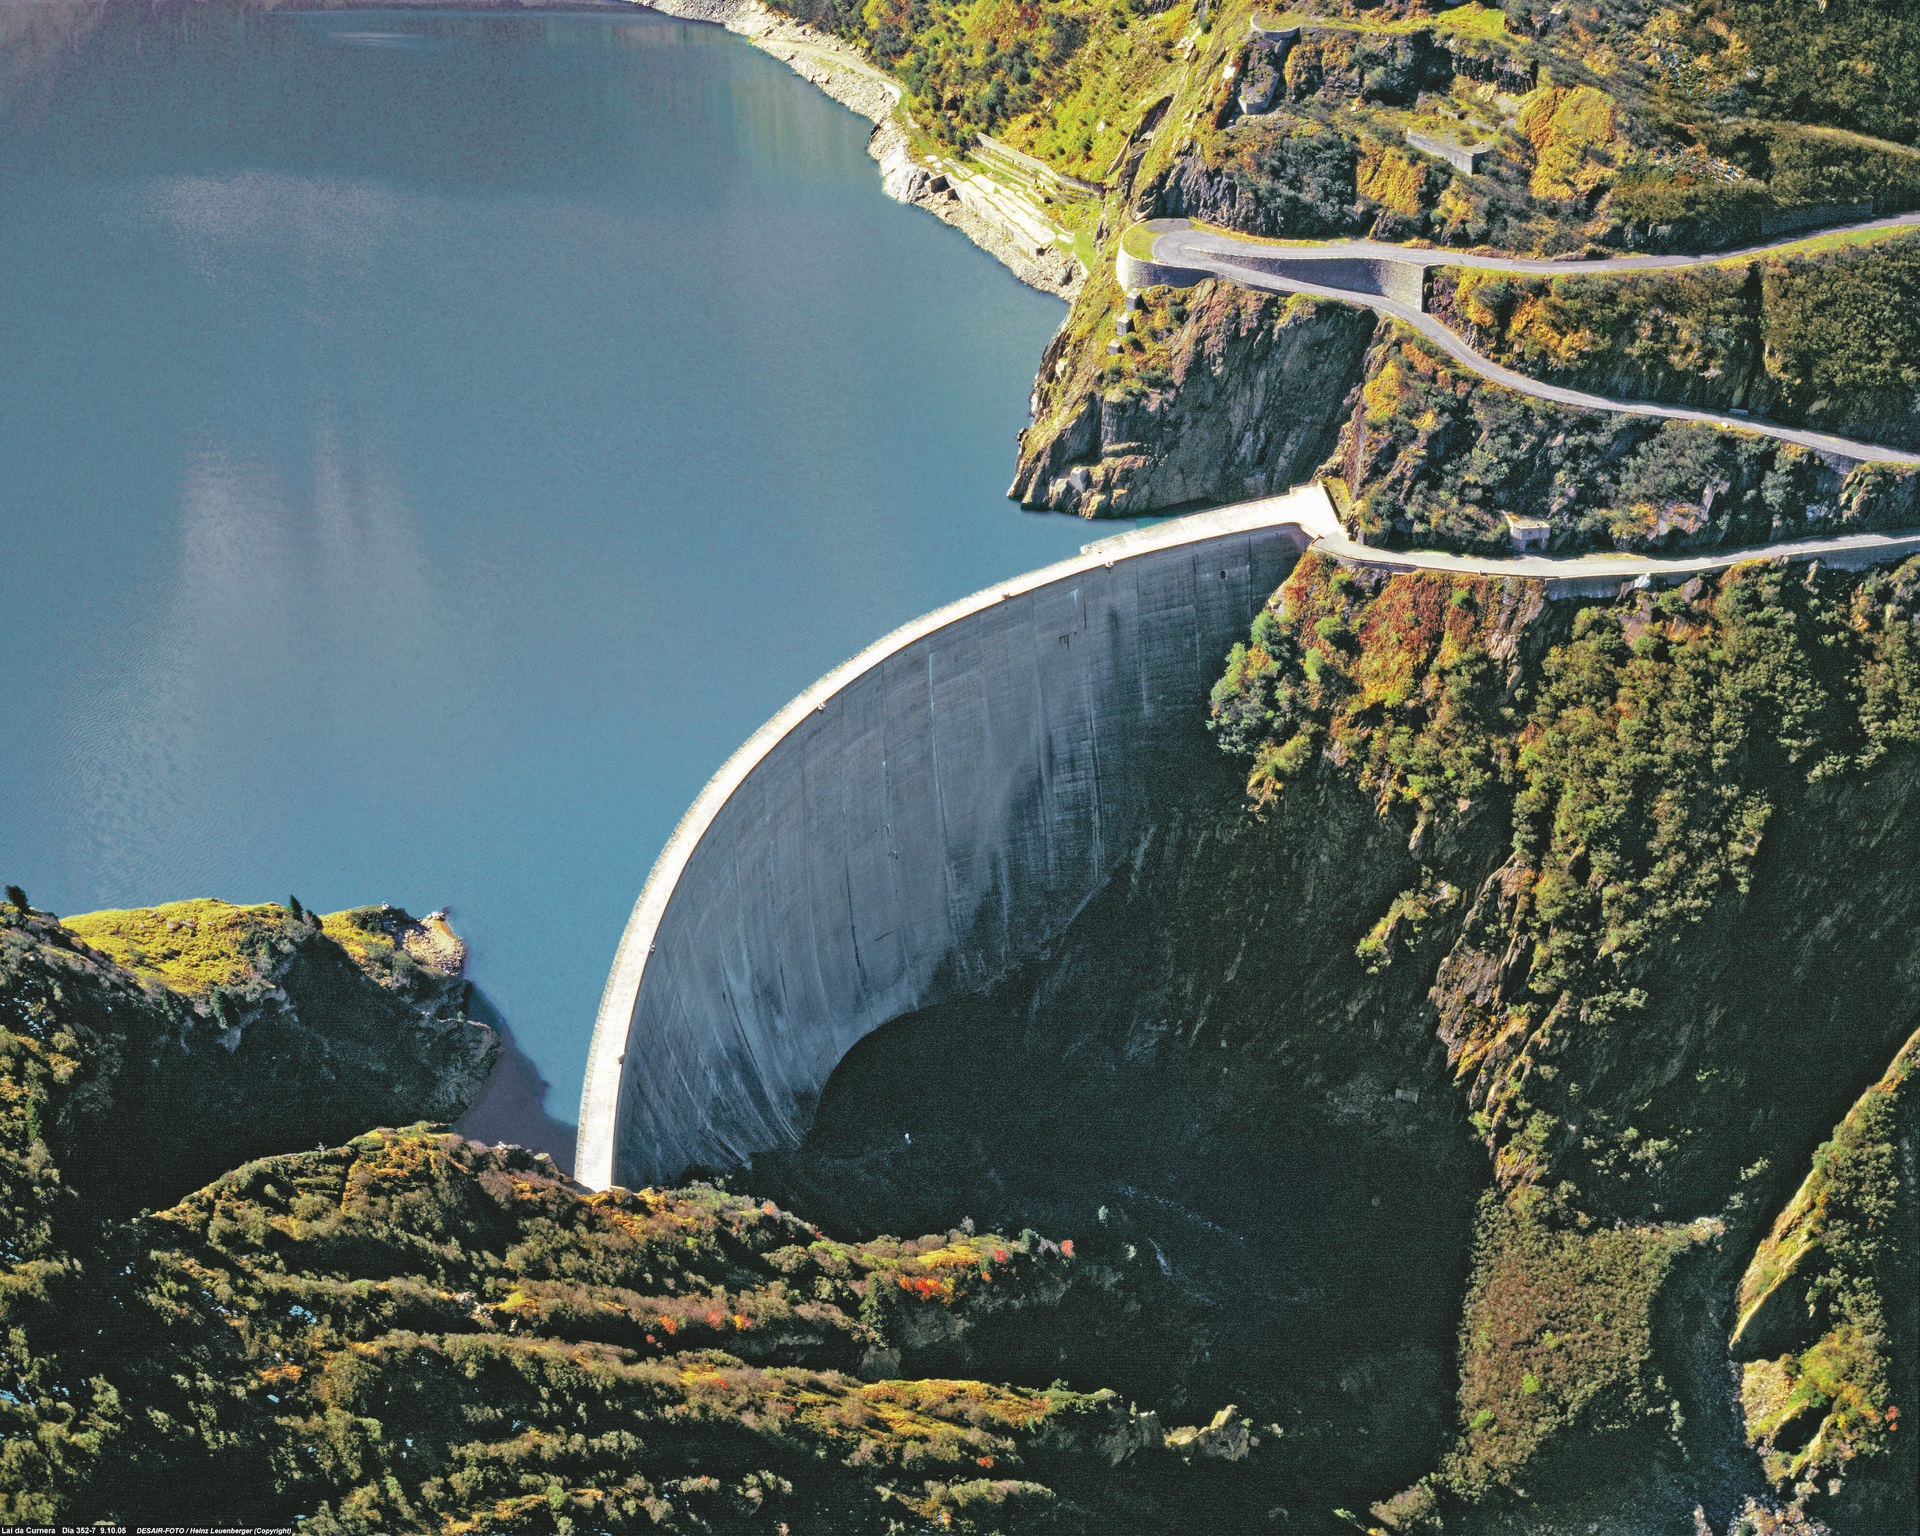 Curnera arch dam: The dam wall is 153 metres high and 350 metres long. It holds a volume of 562,000 m3.